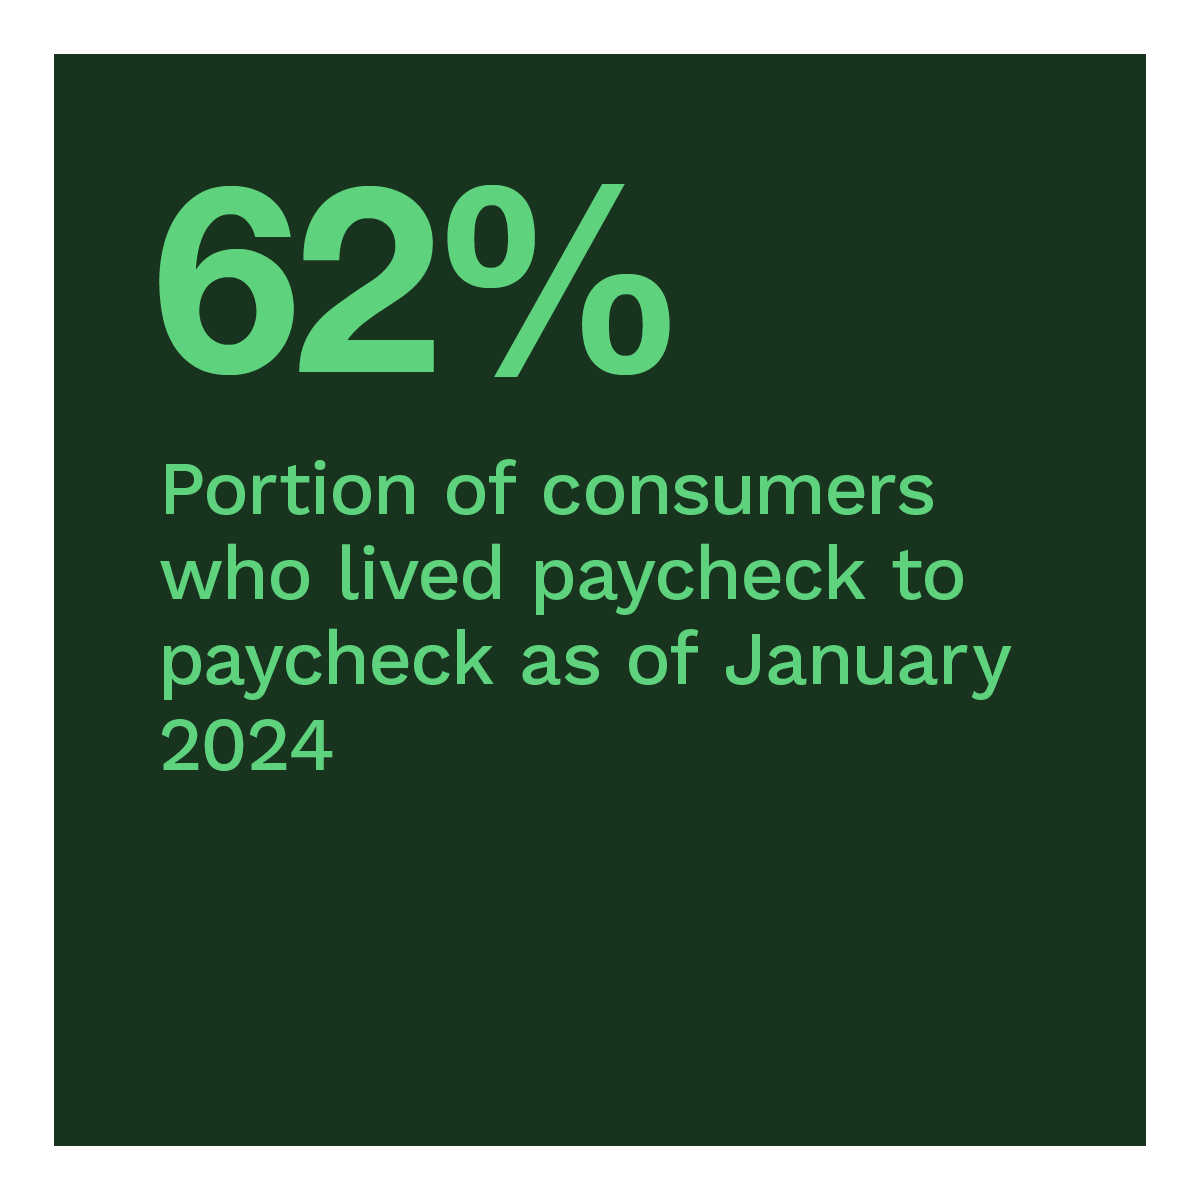  Portion of consumers who lived paycheck to paycheck as of January 2024